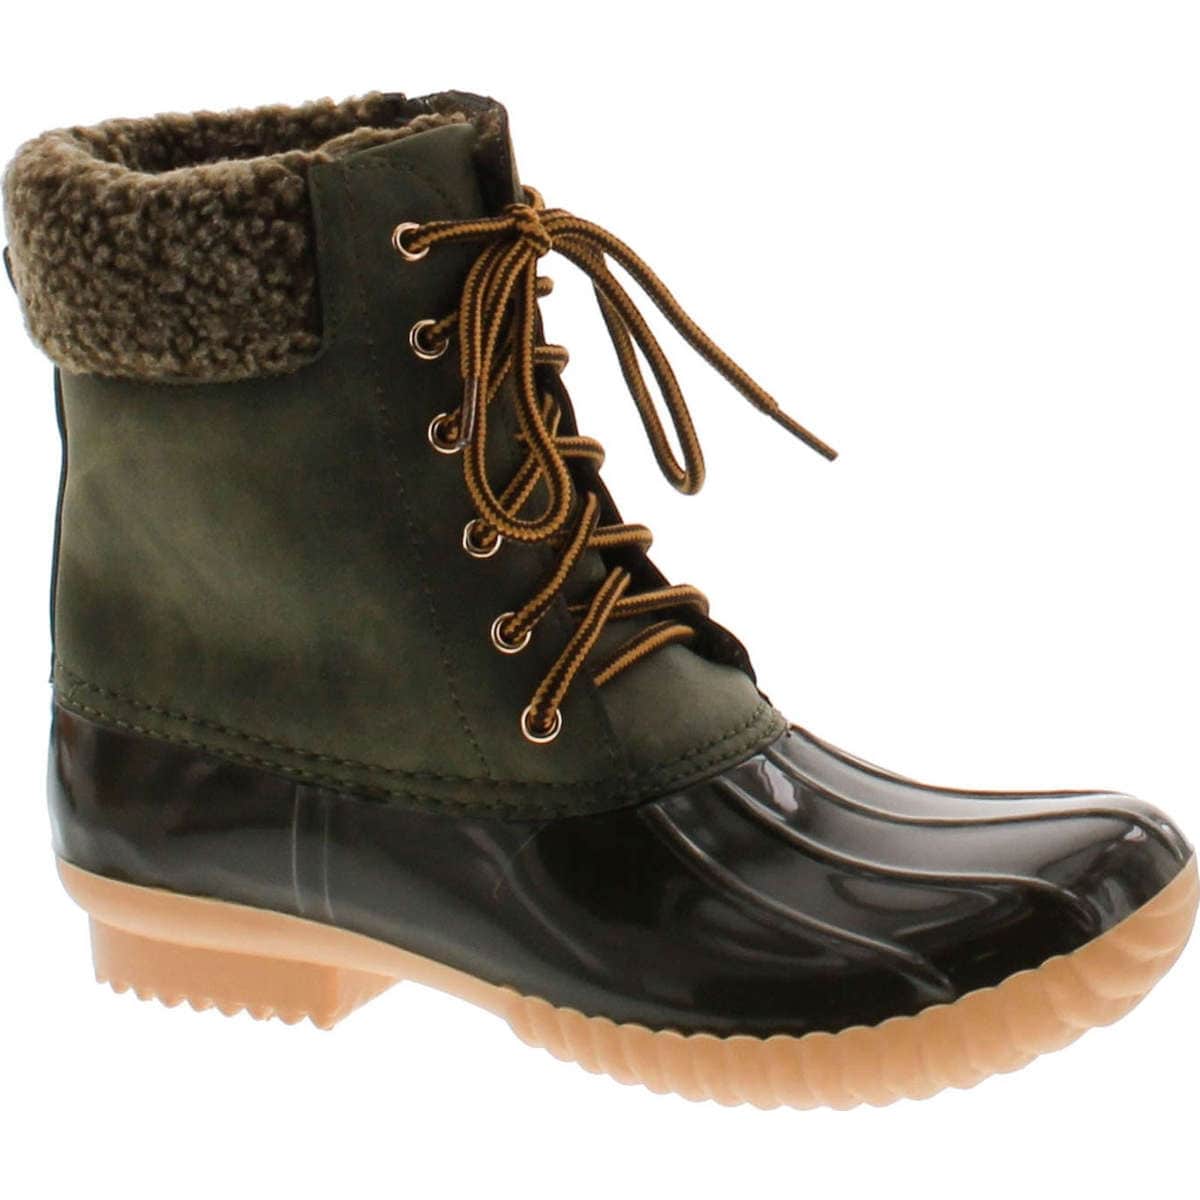 duck boots with zipper